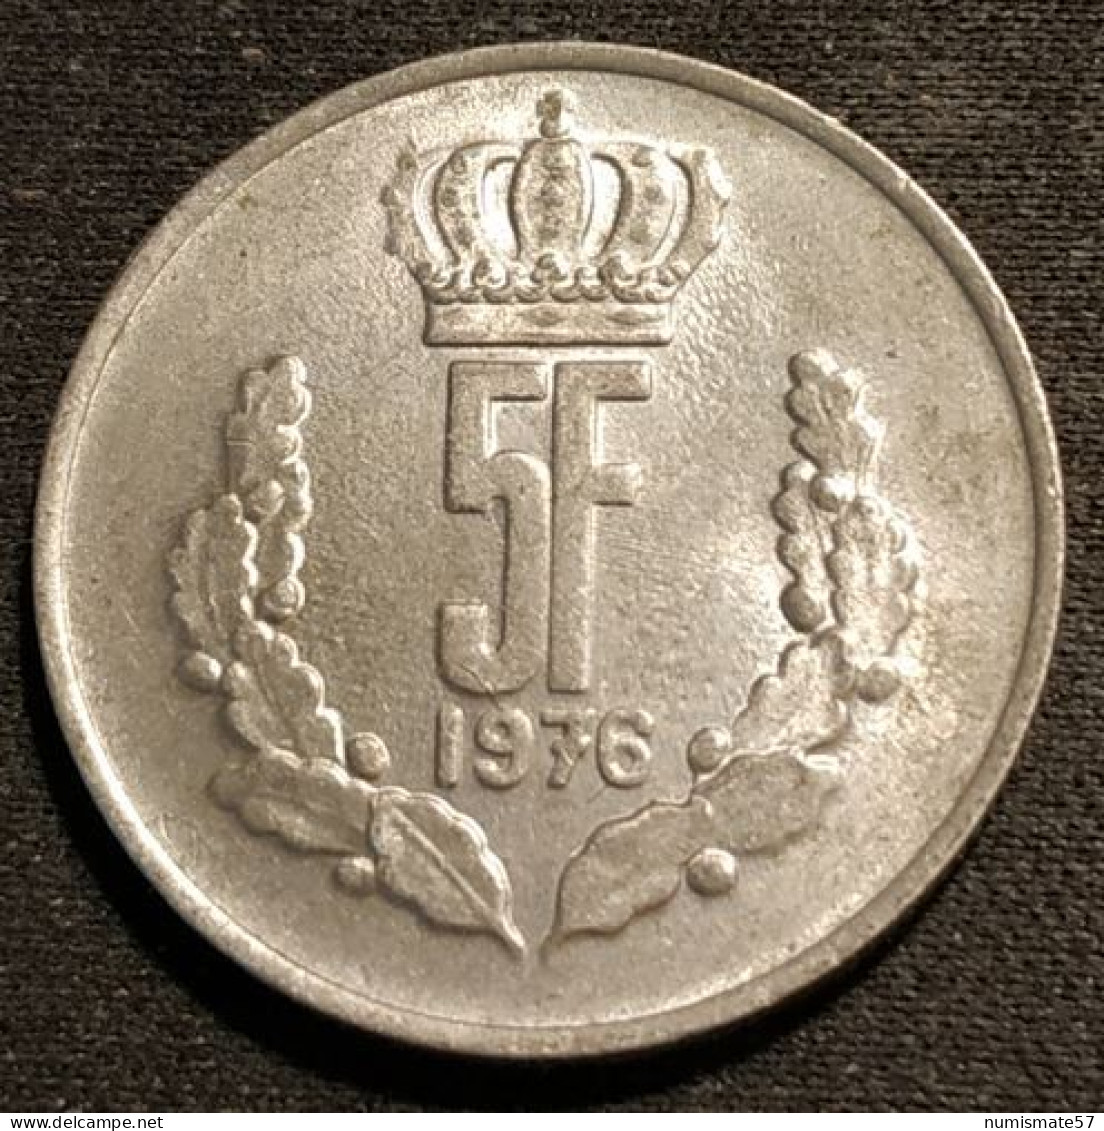 LUXEMBOURG - 5 FRANCS 1976 - Grand-Duc Jean - KM 56 - Luxembourg